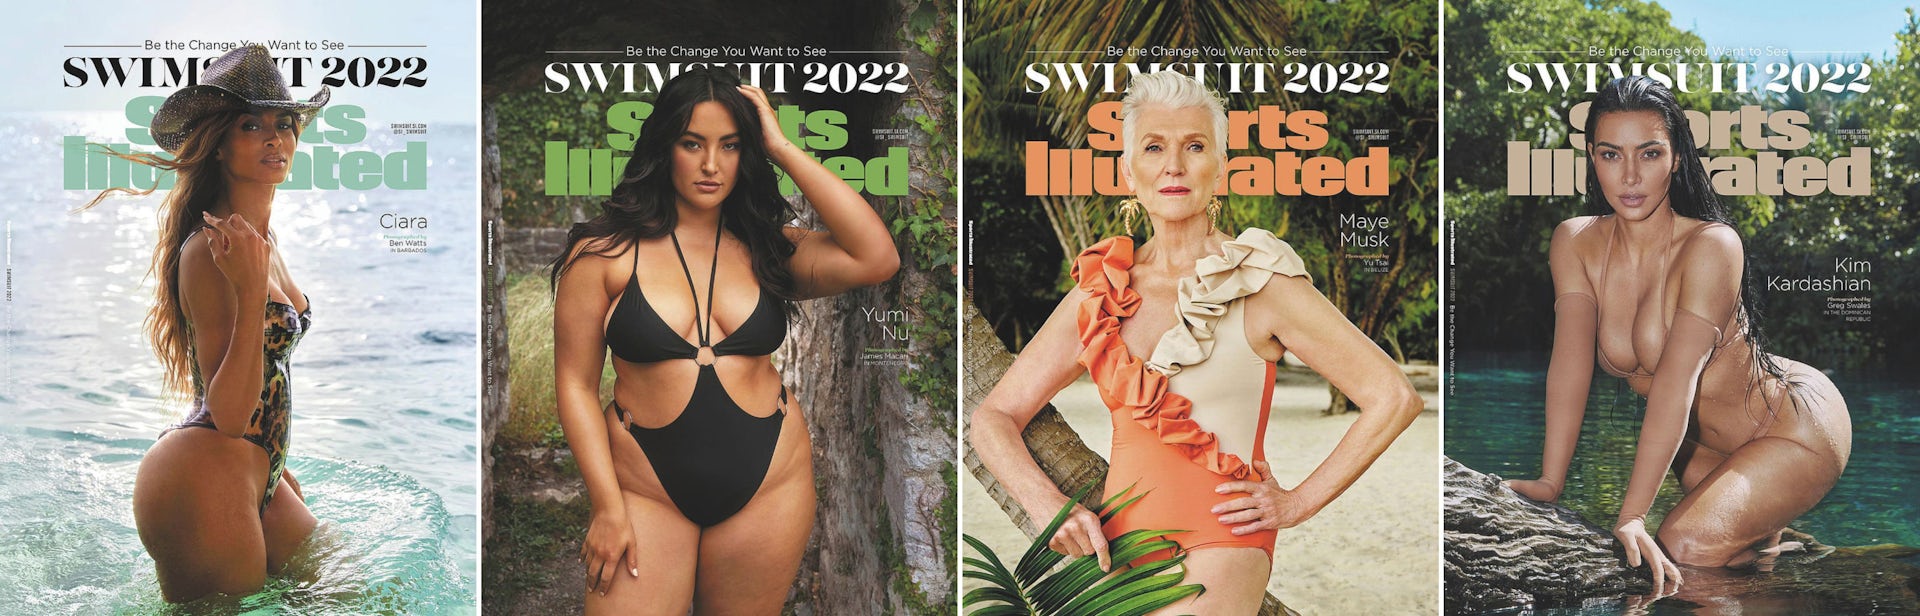 Sports Illustrated Swimsuit Is inclusive objectification something to celebrate? image photo